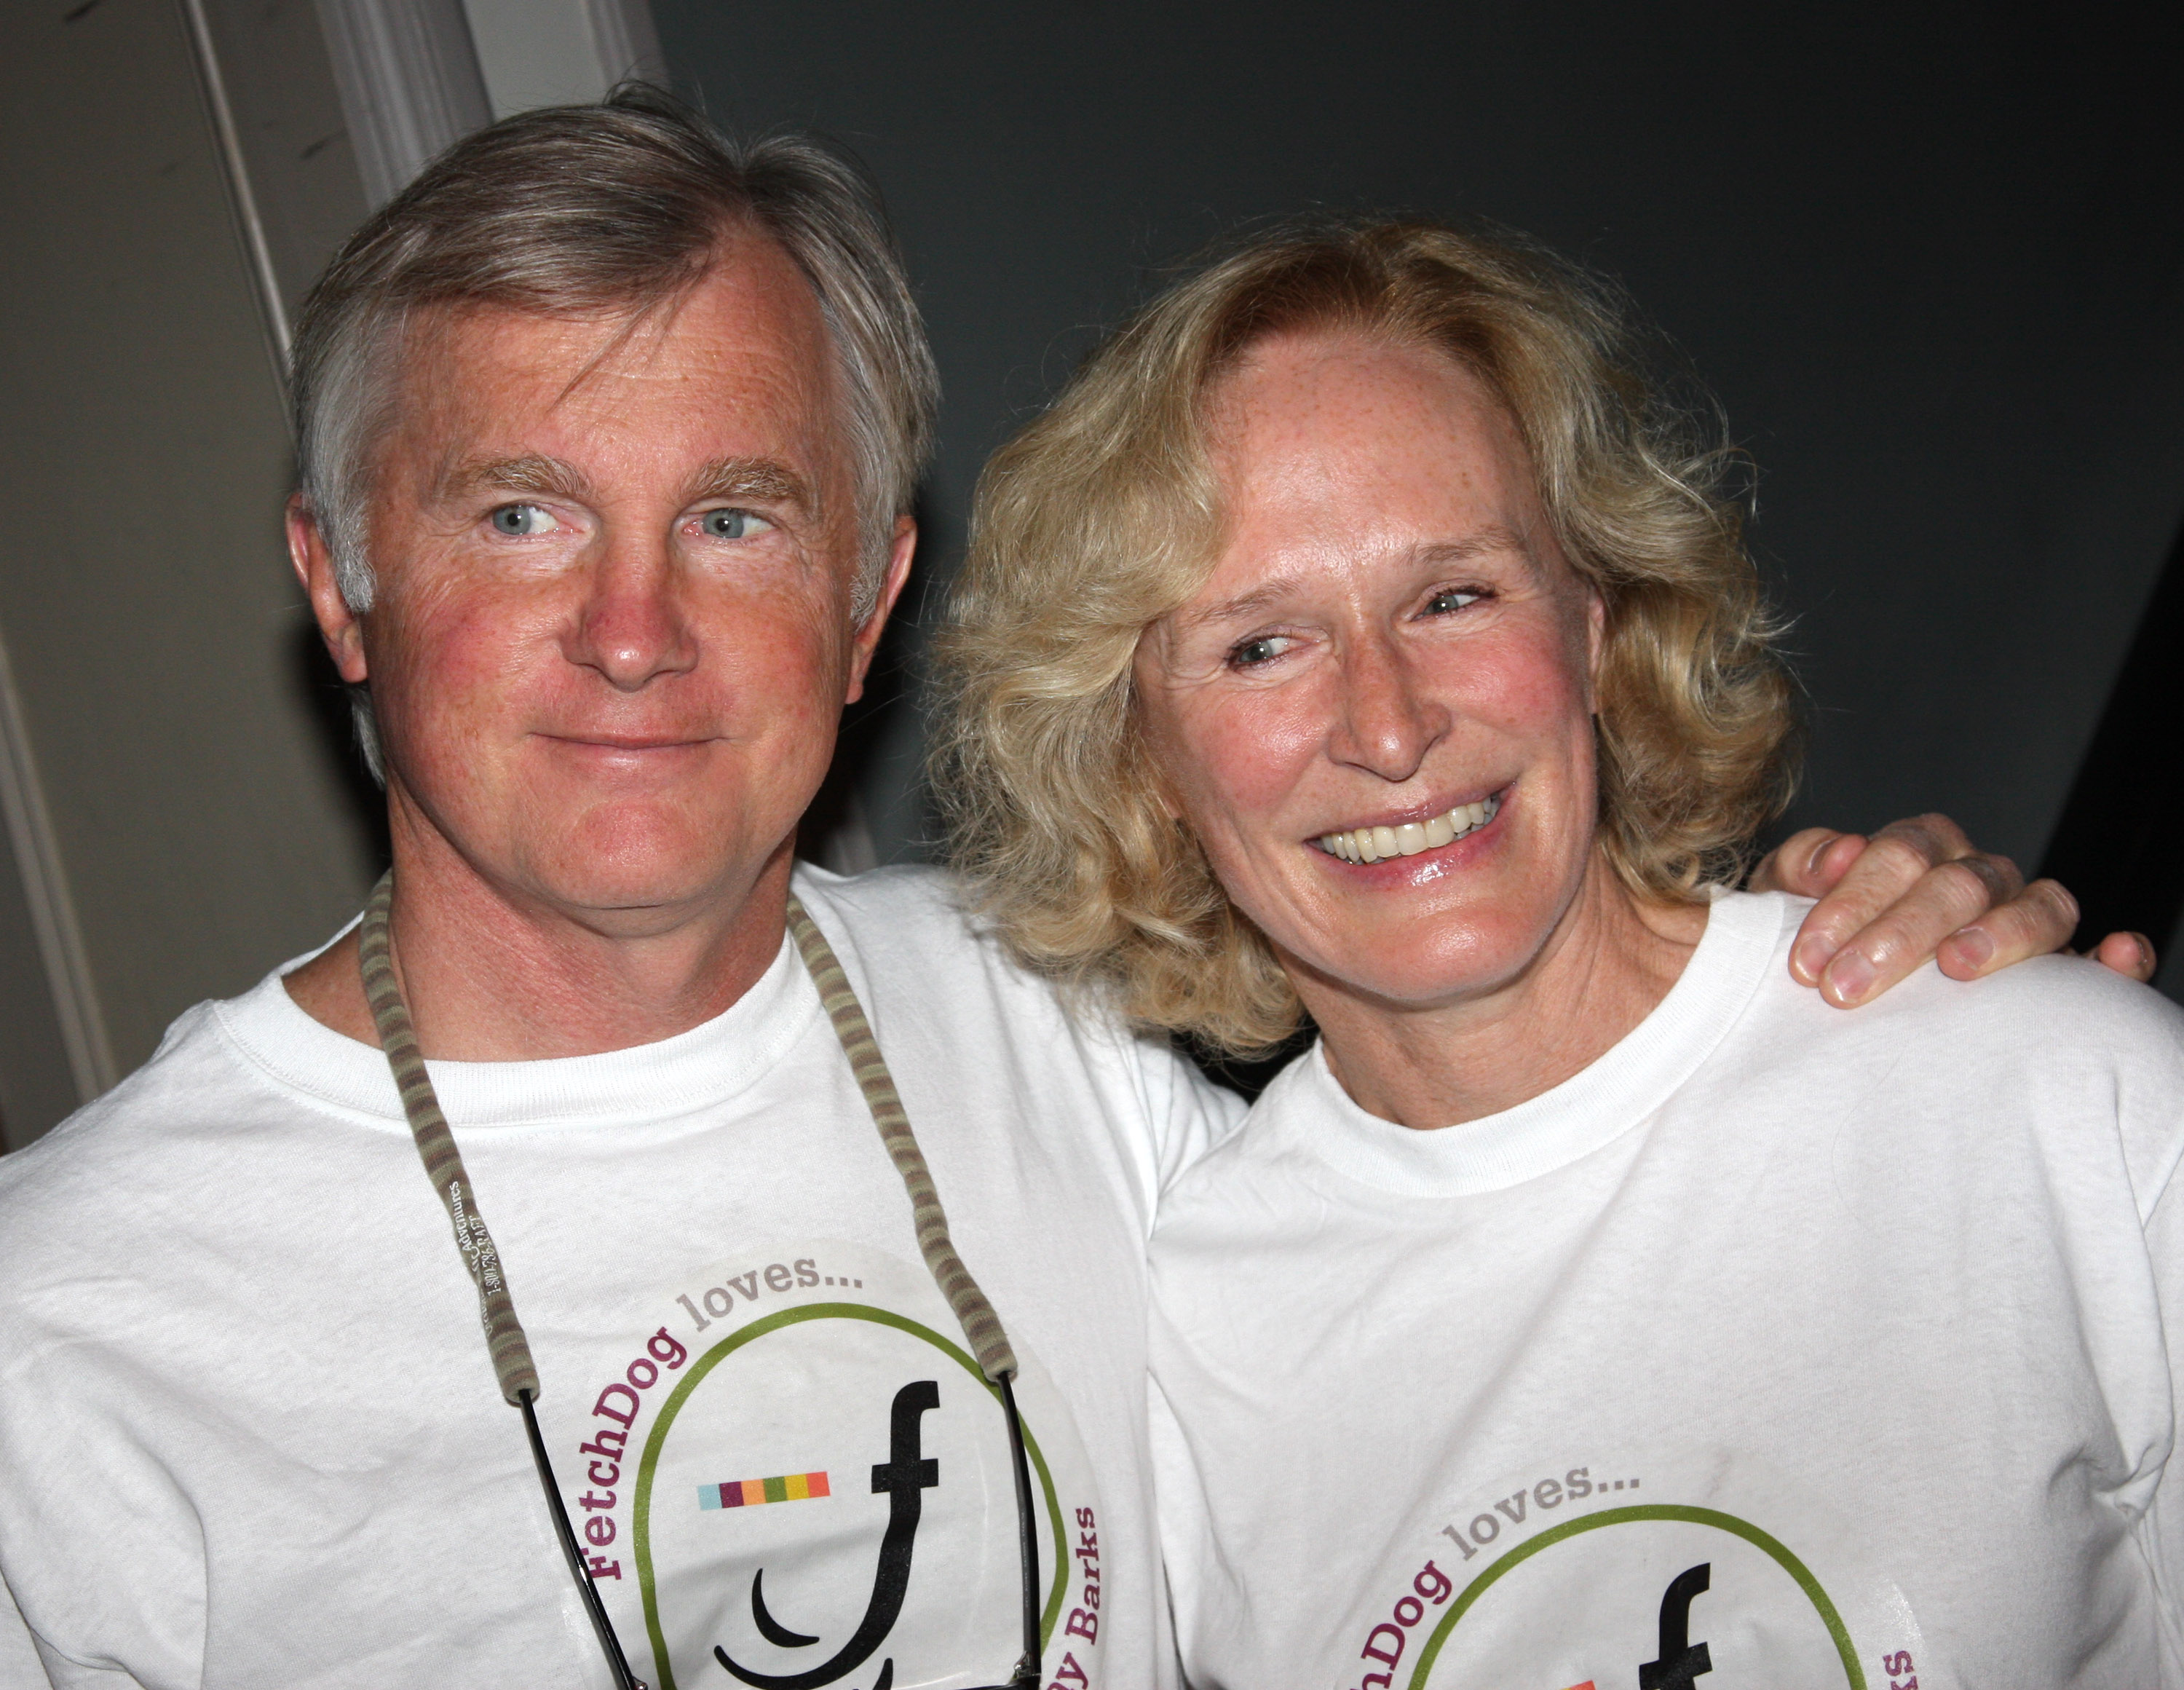 David Shaw and Glenn Close pose at Broadway Barks 10 in New York City on July 12, 2008 | Source: Getty Images